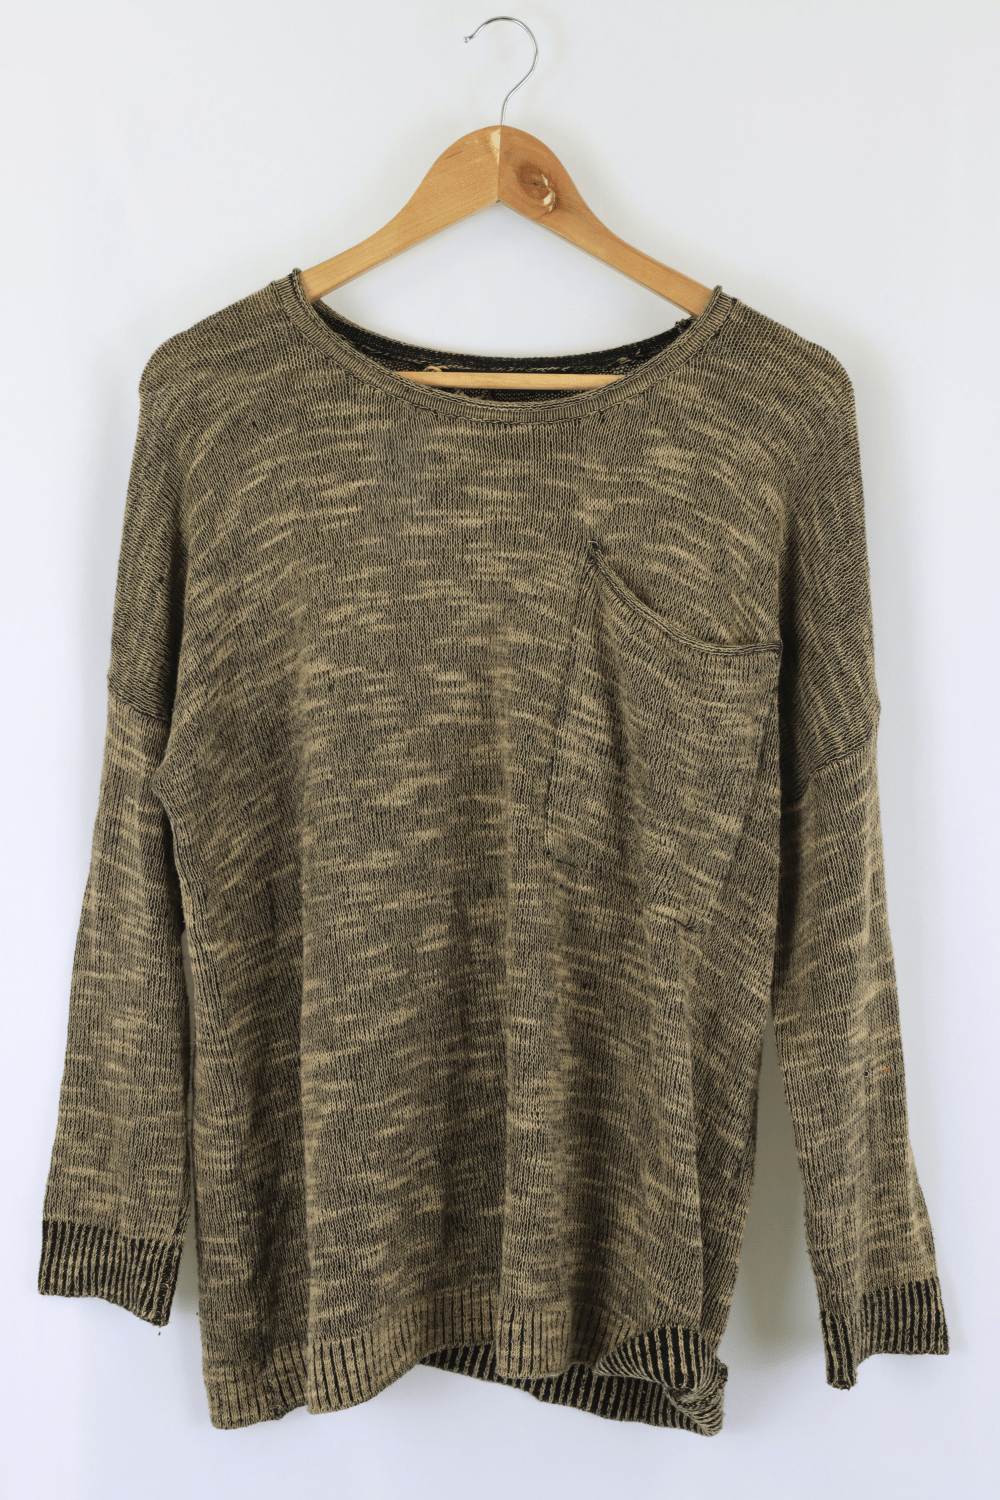 Sportsgirl Brown And Black Knitted Jumper S